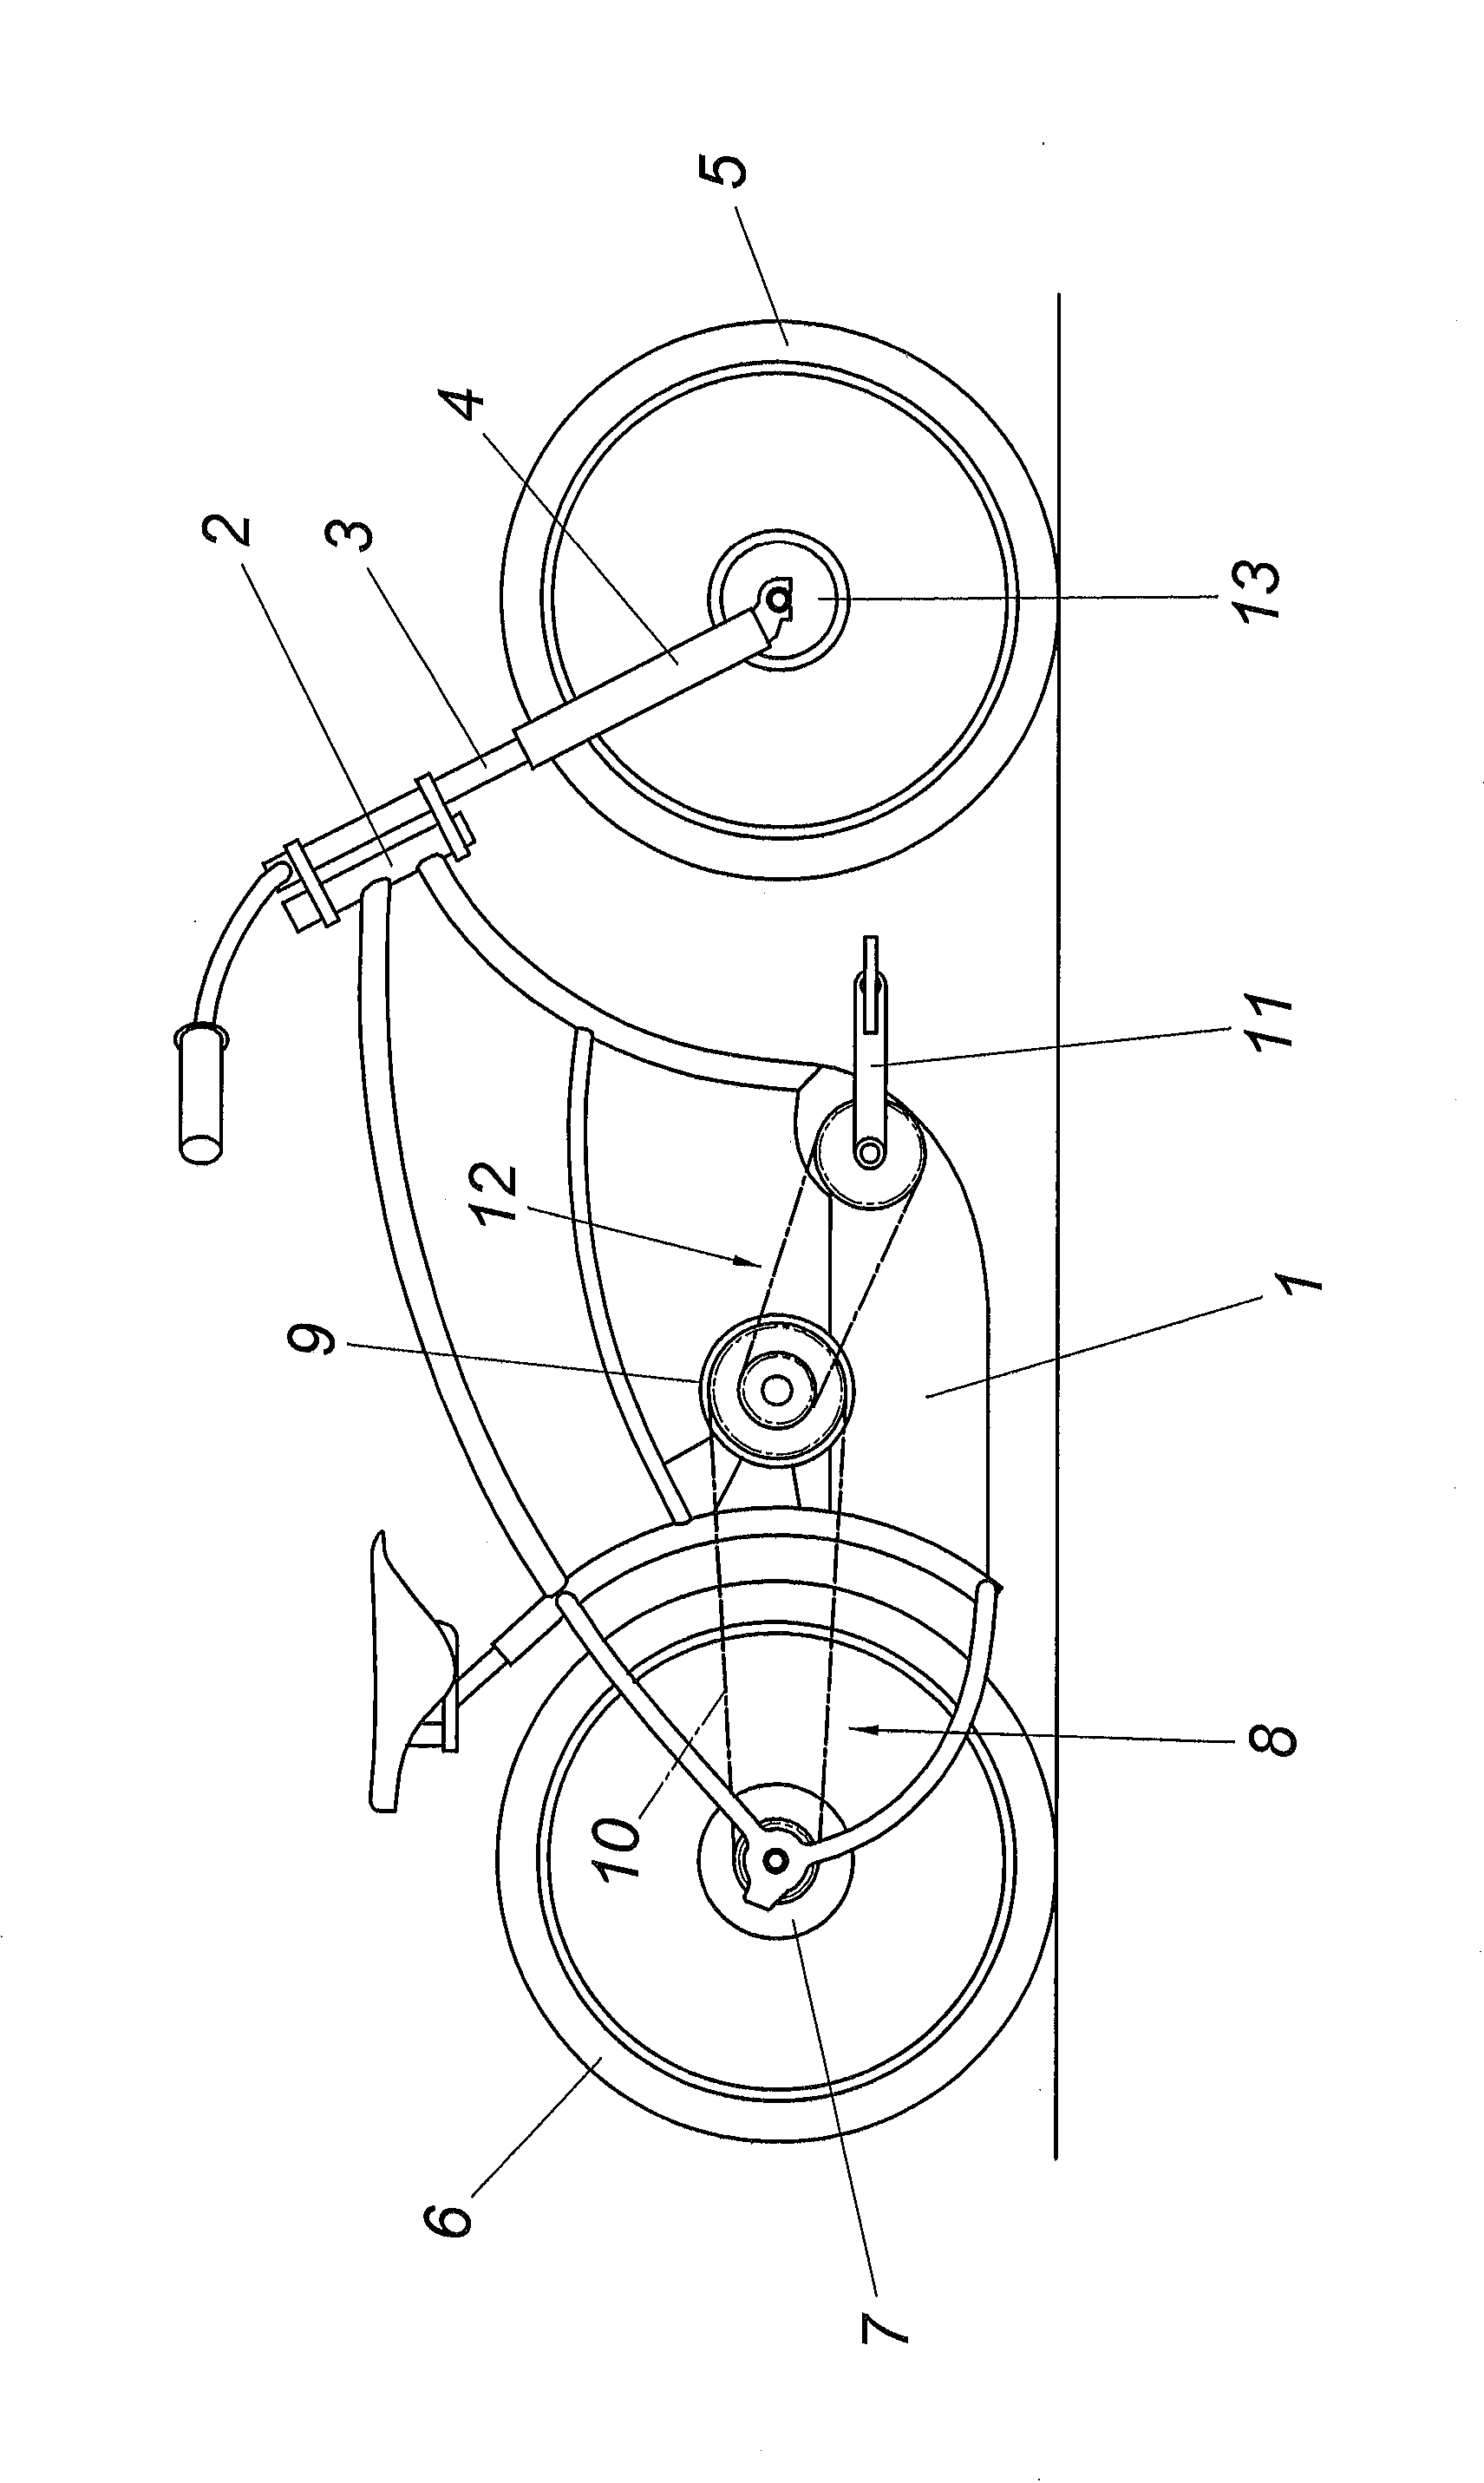 Bicycle having an electrical auiliary drive